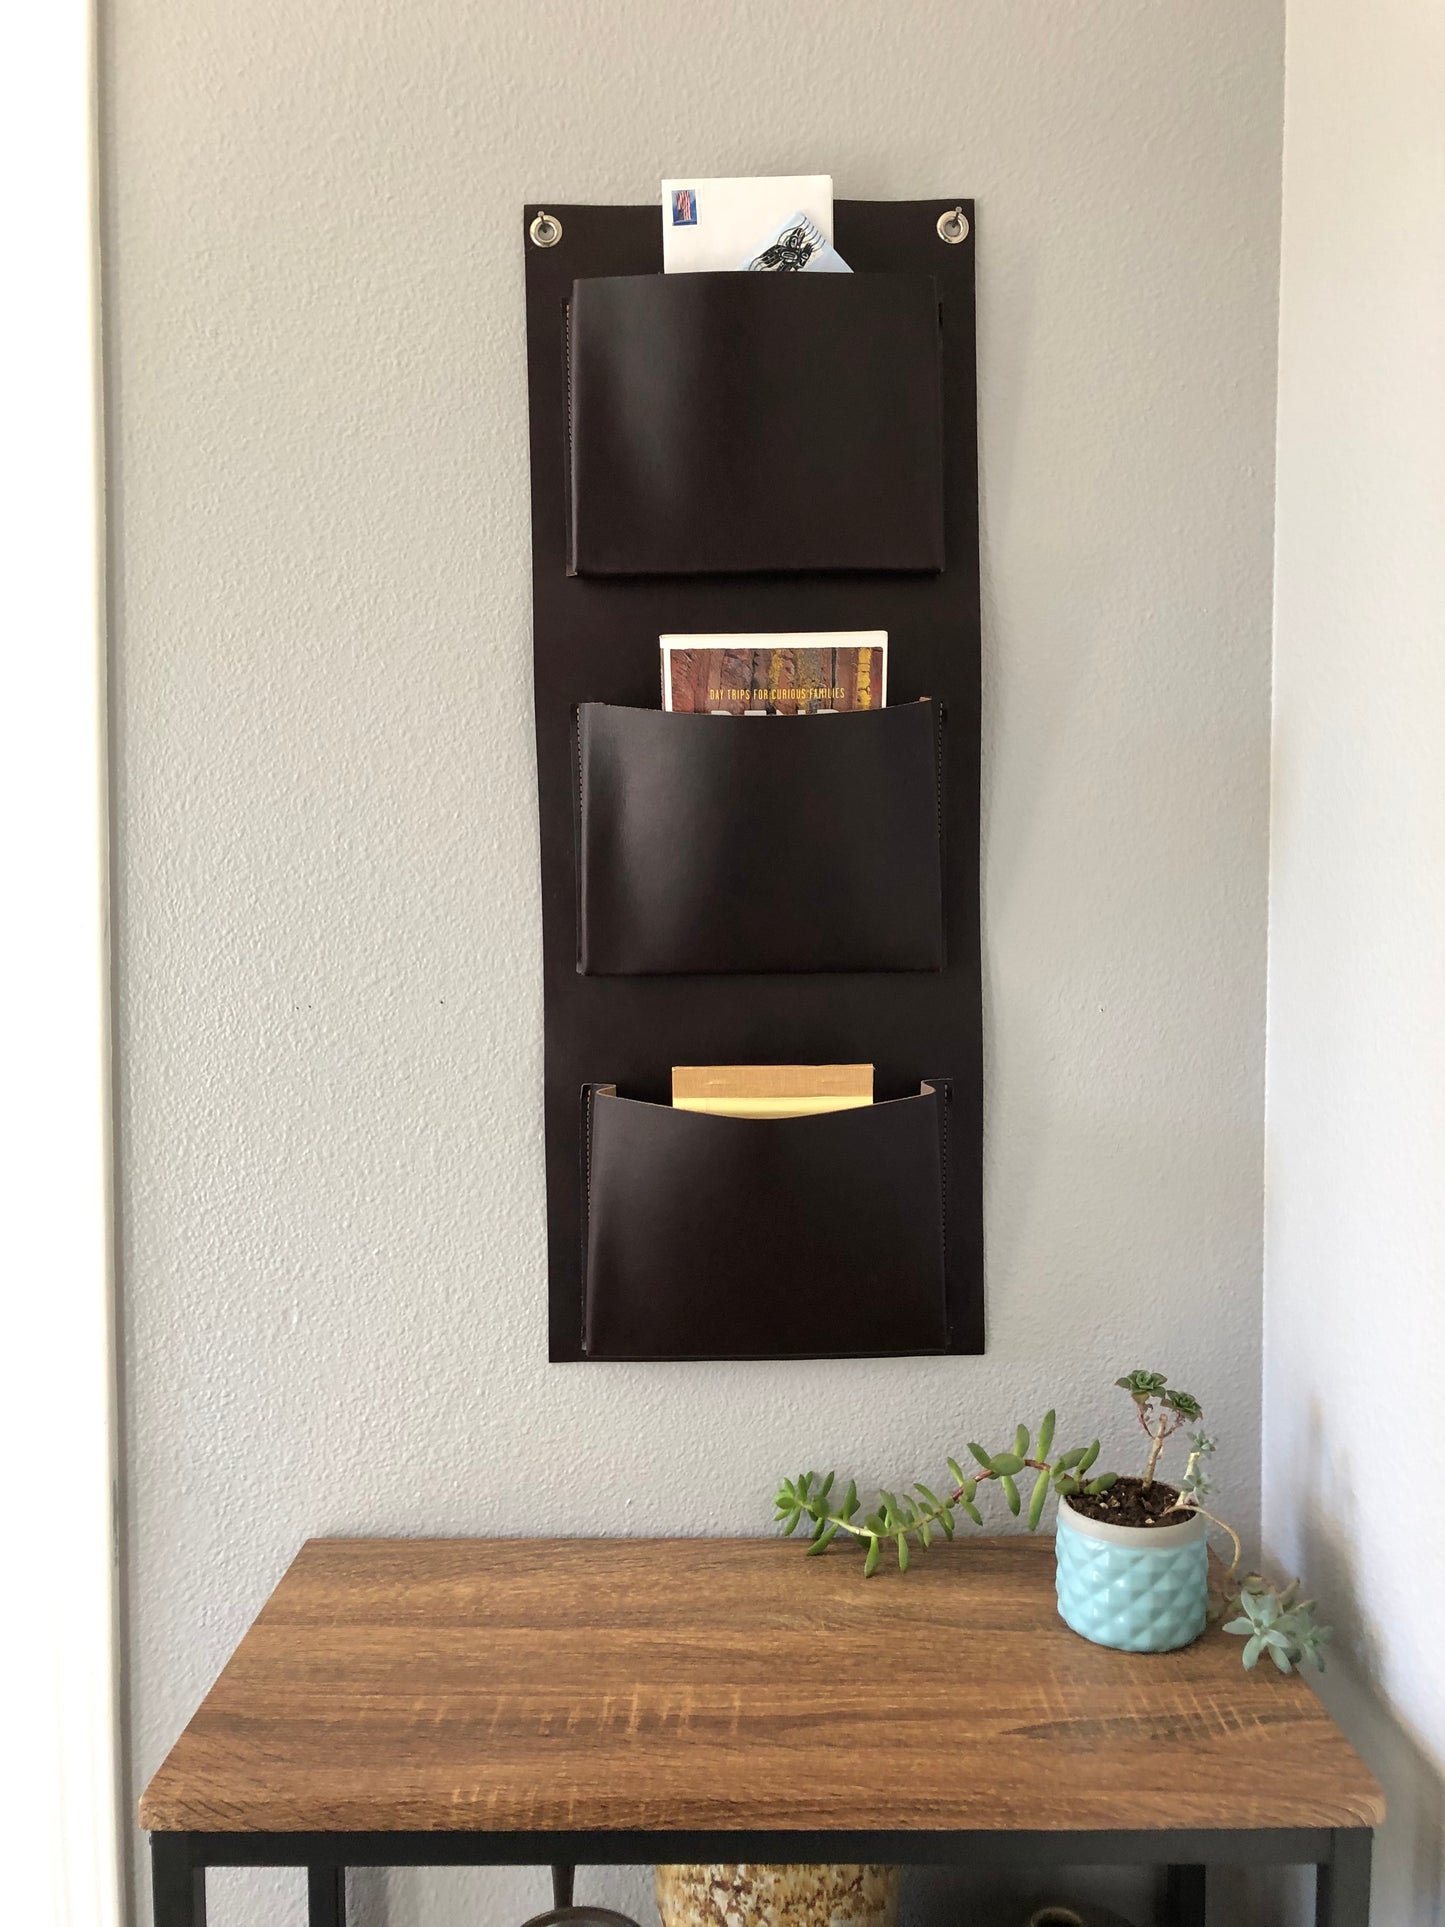 Leather Wall Organizer | Hanging Storage Pockets | Vertical Organizer for Scarves, Mail, or Shoes